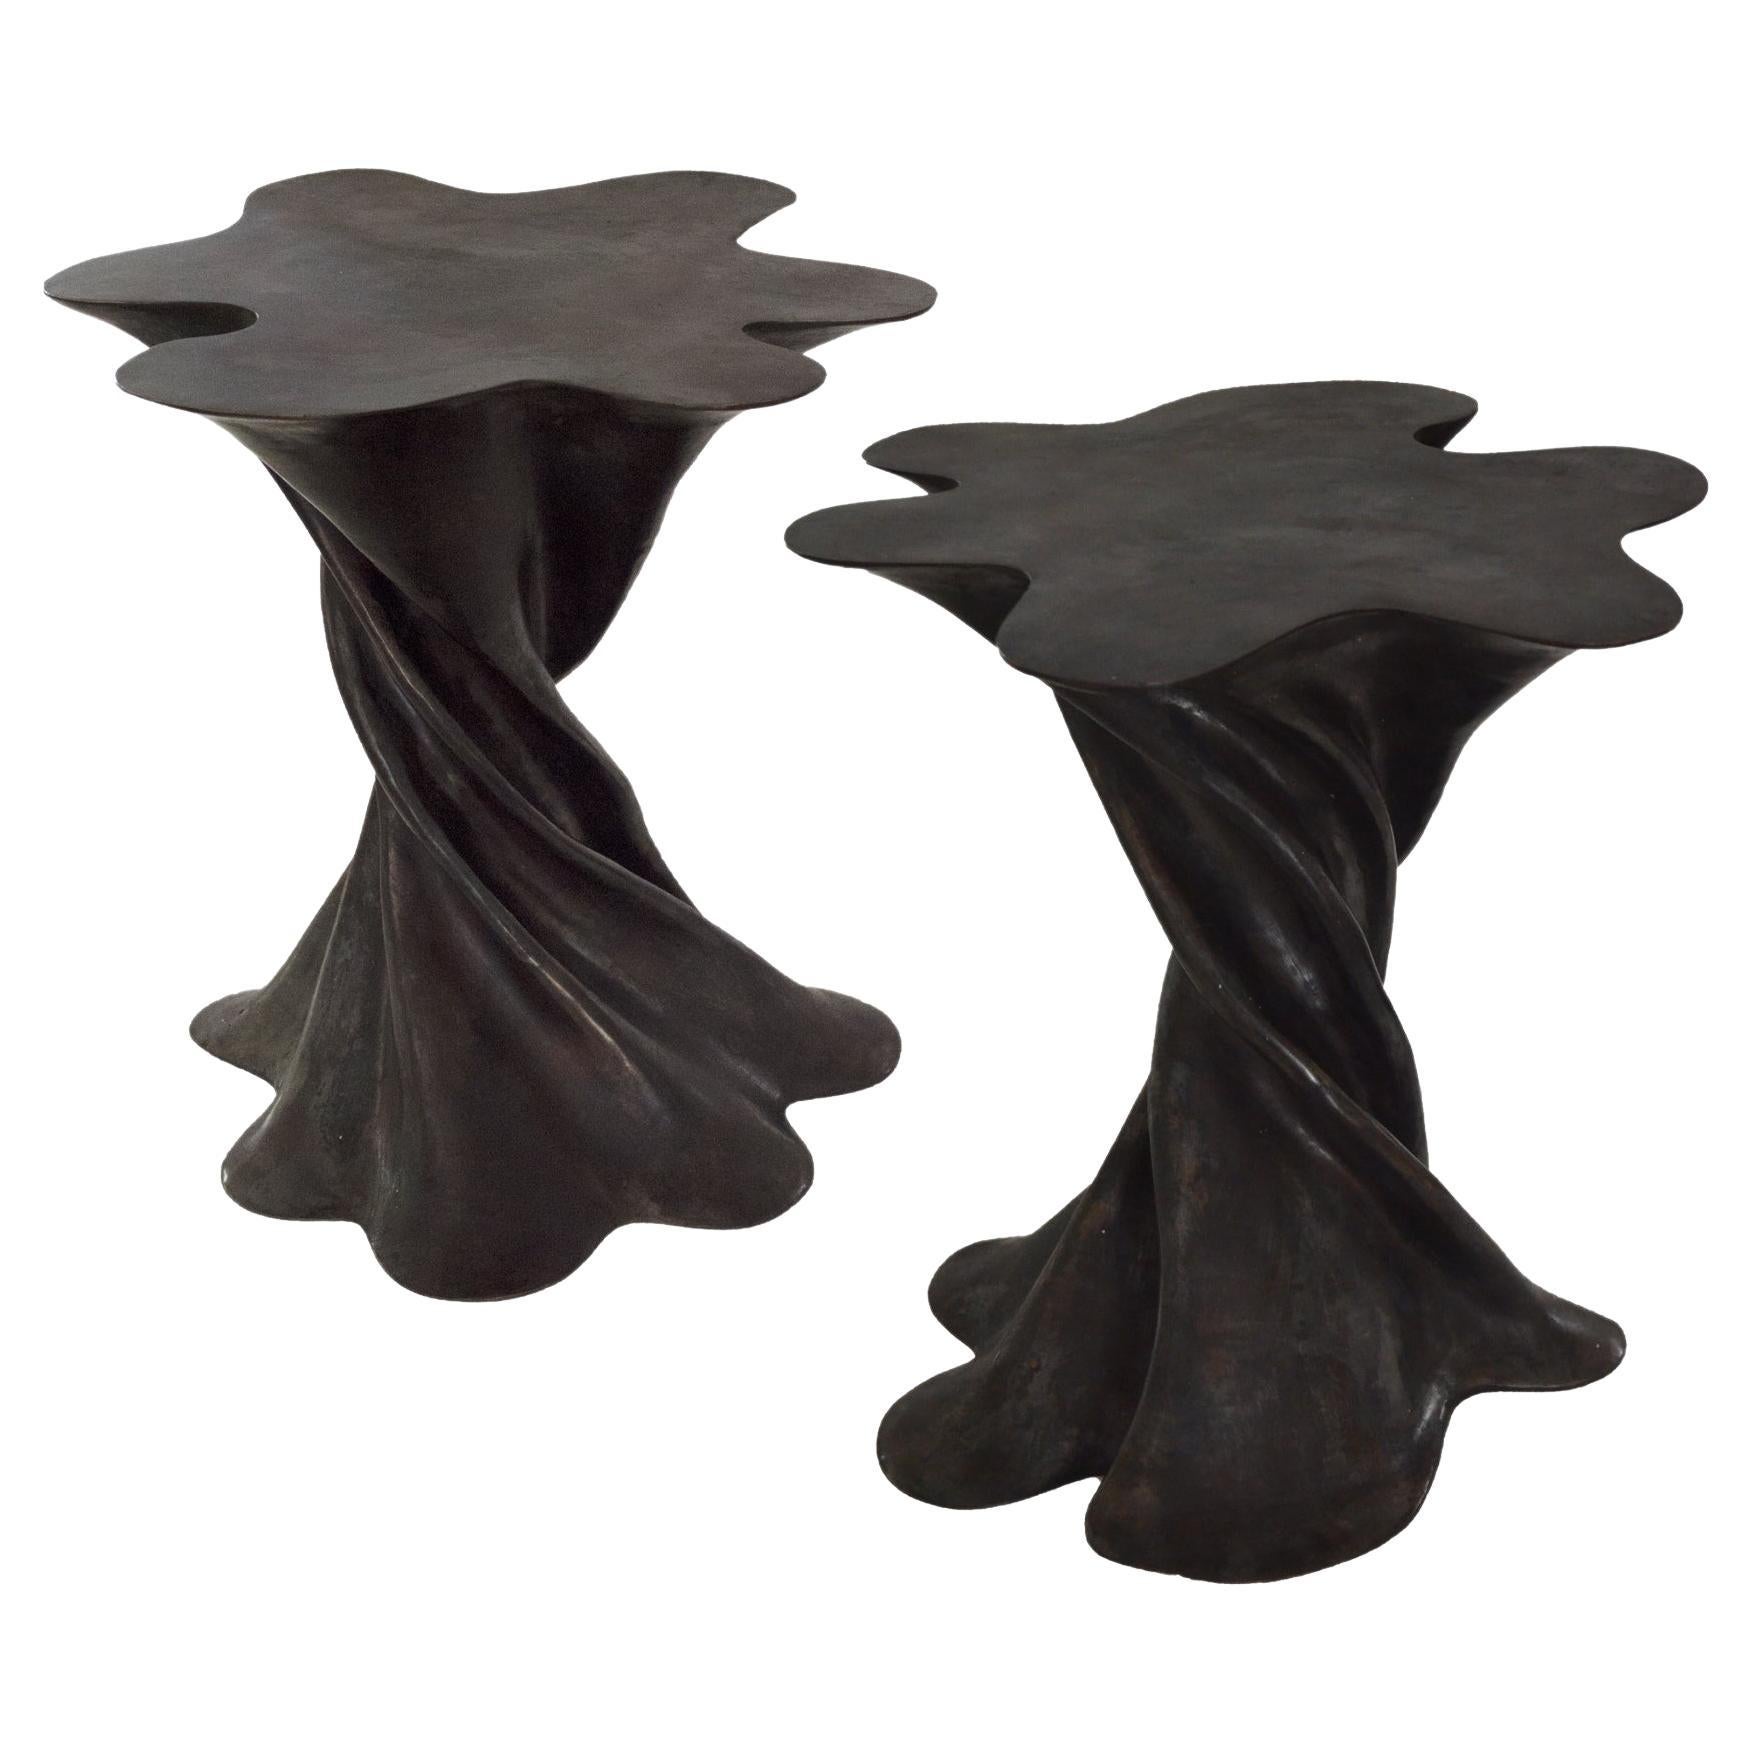 Set of Two Waltz Tables in Dark Patina Handcrafted in India by Stephanie Odegard